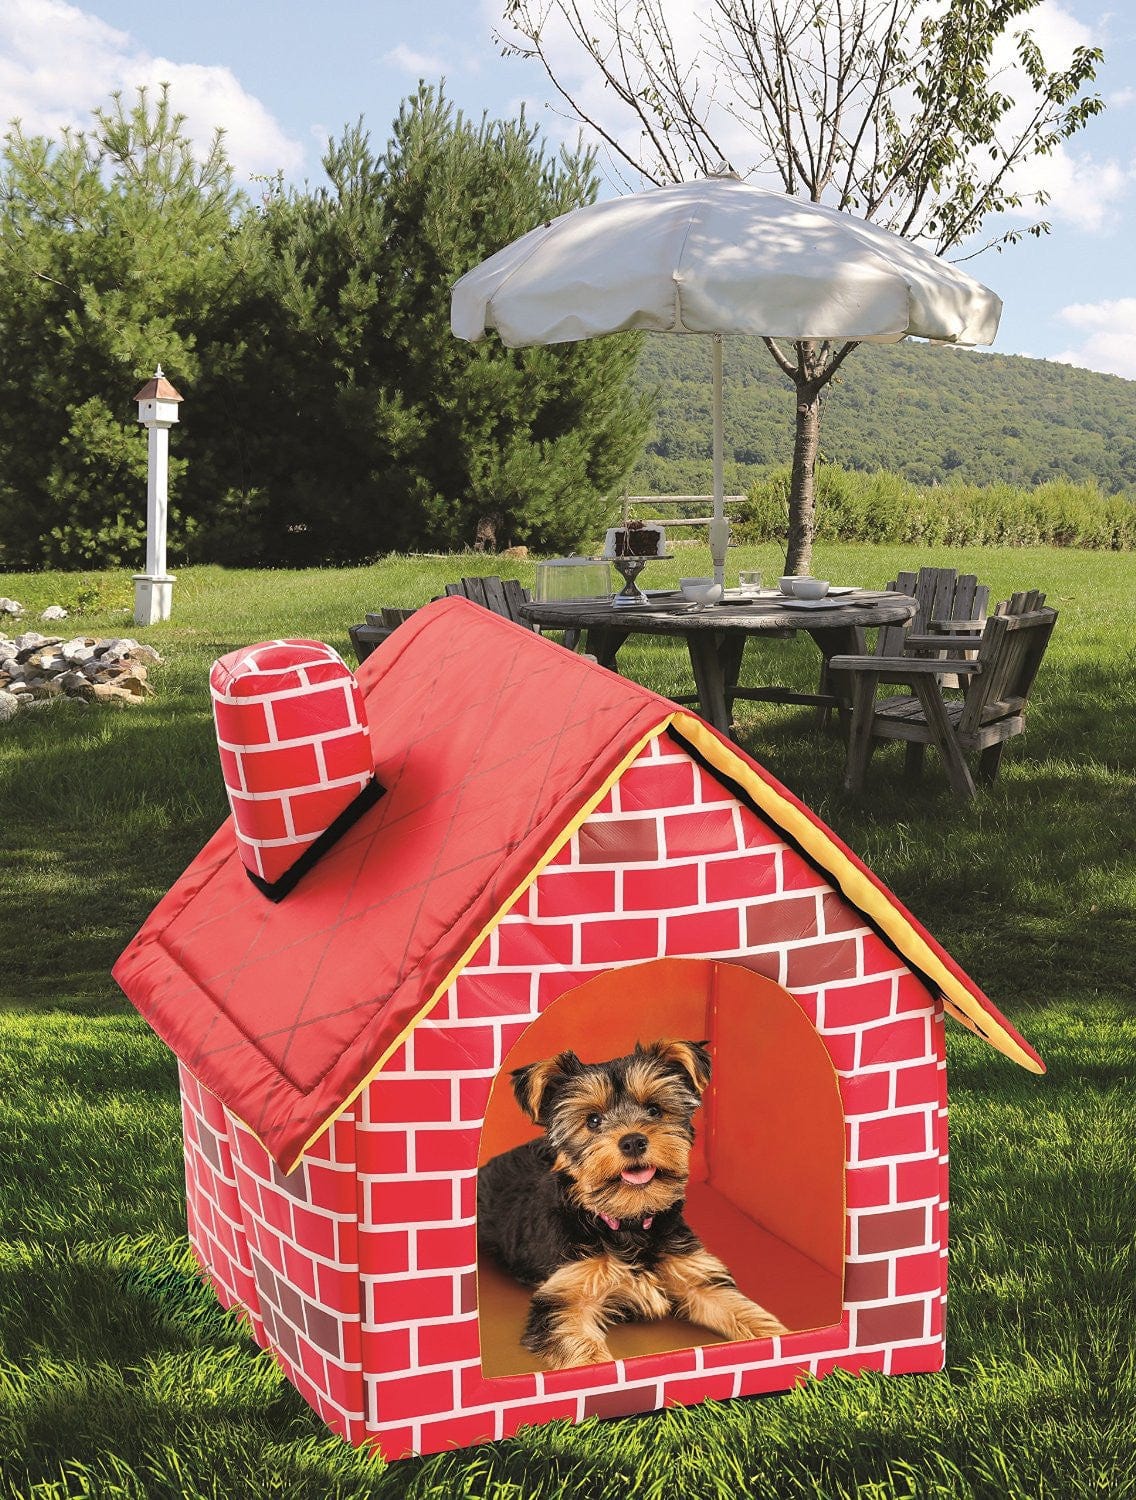 WOCLEILIY Foldable Dog House Small House Pet Bed Tent Cat Kennel Indoor Portable Trave EAN13